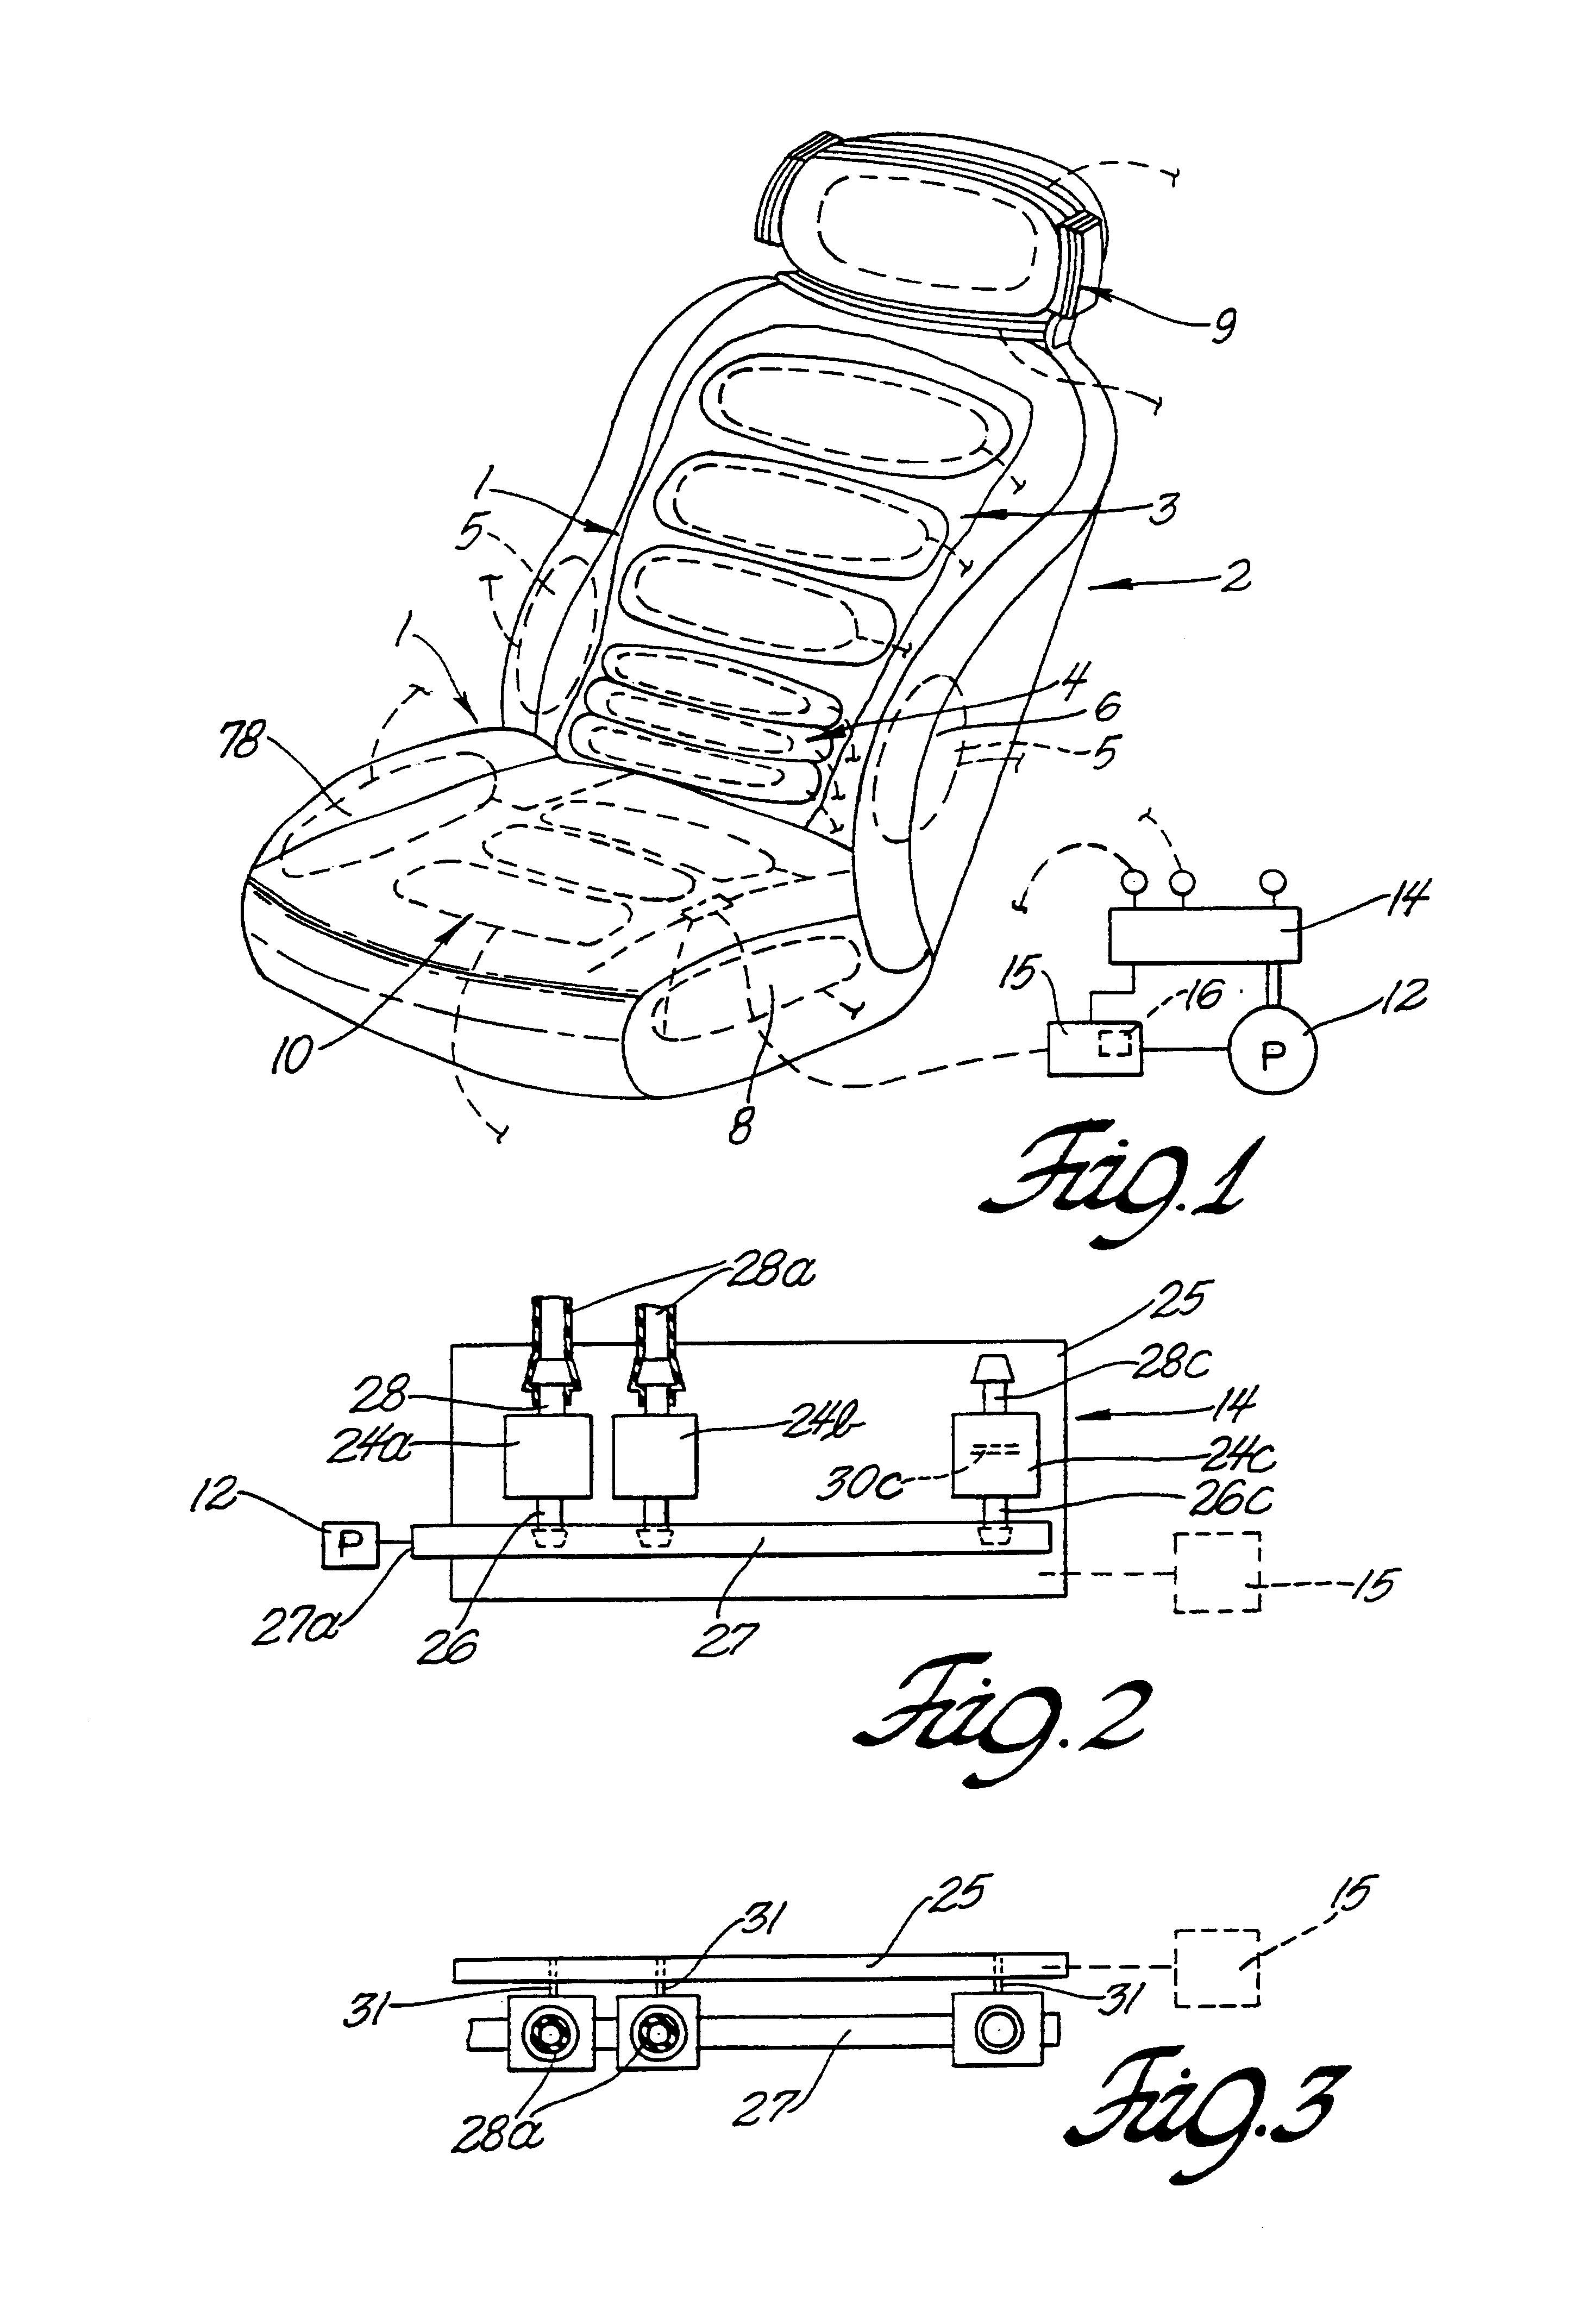 Microvalve controller for pneumatically contoured support